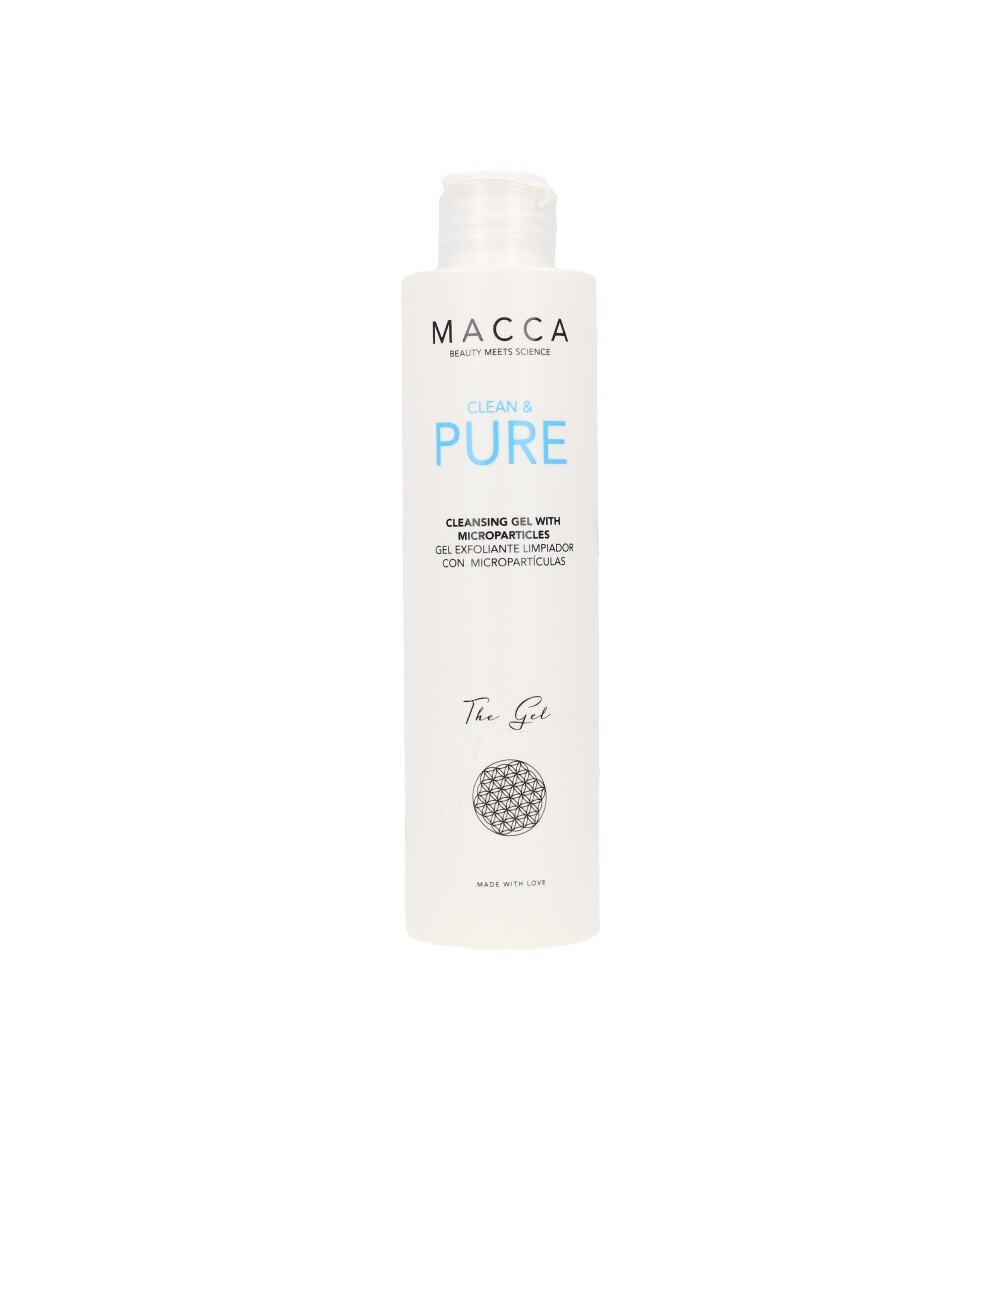 CLEAN & PURE cleansing gel with microparticles 200 ml - NE130996